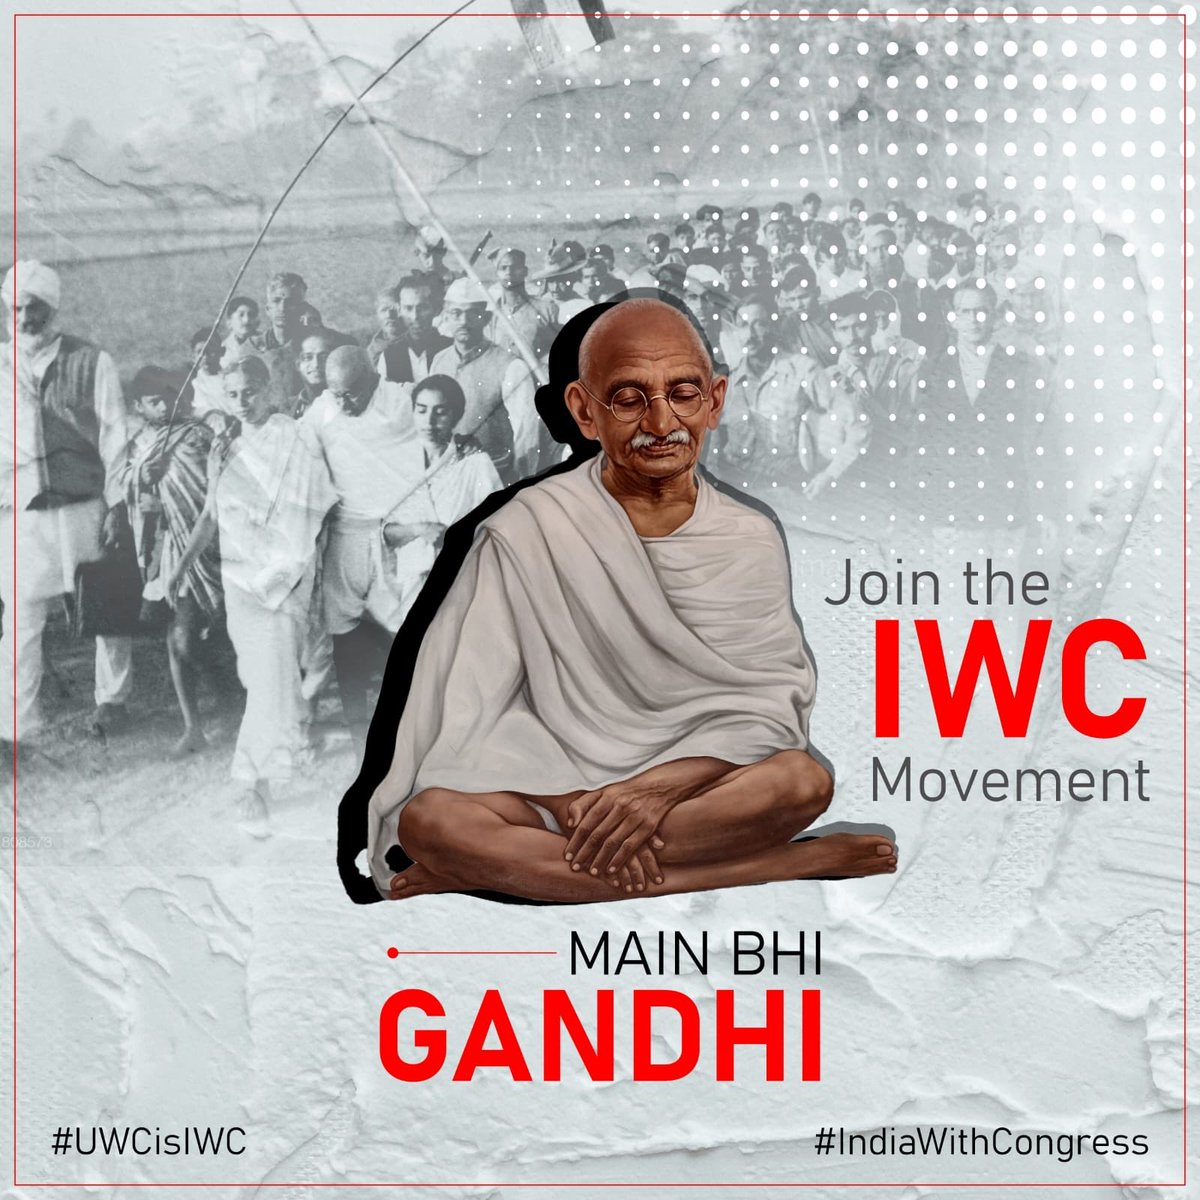 If you have the same ‘jazba’ to see a United India and believe we need a ‘Gandhi-satyagraha’ then -
Join IWC Movement
Connect with Congress

URL - indiawithcongress.com

#UWCisIWC 
#IndiaWithCongress